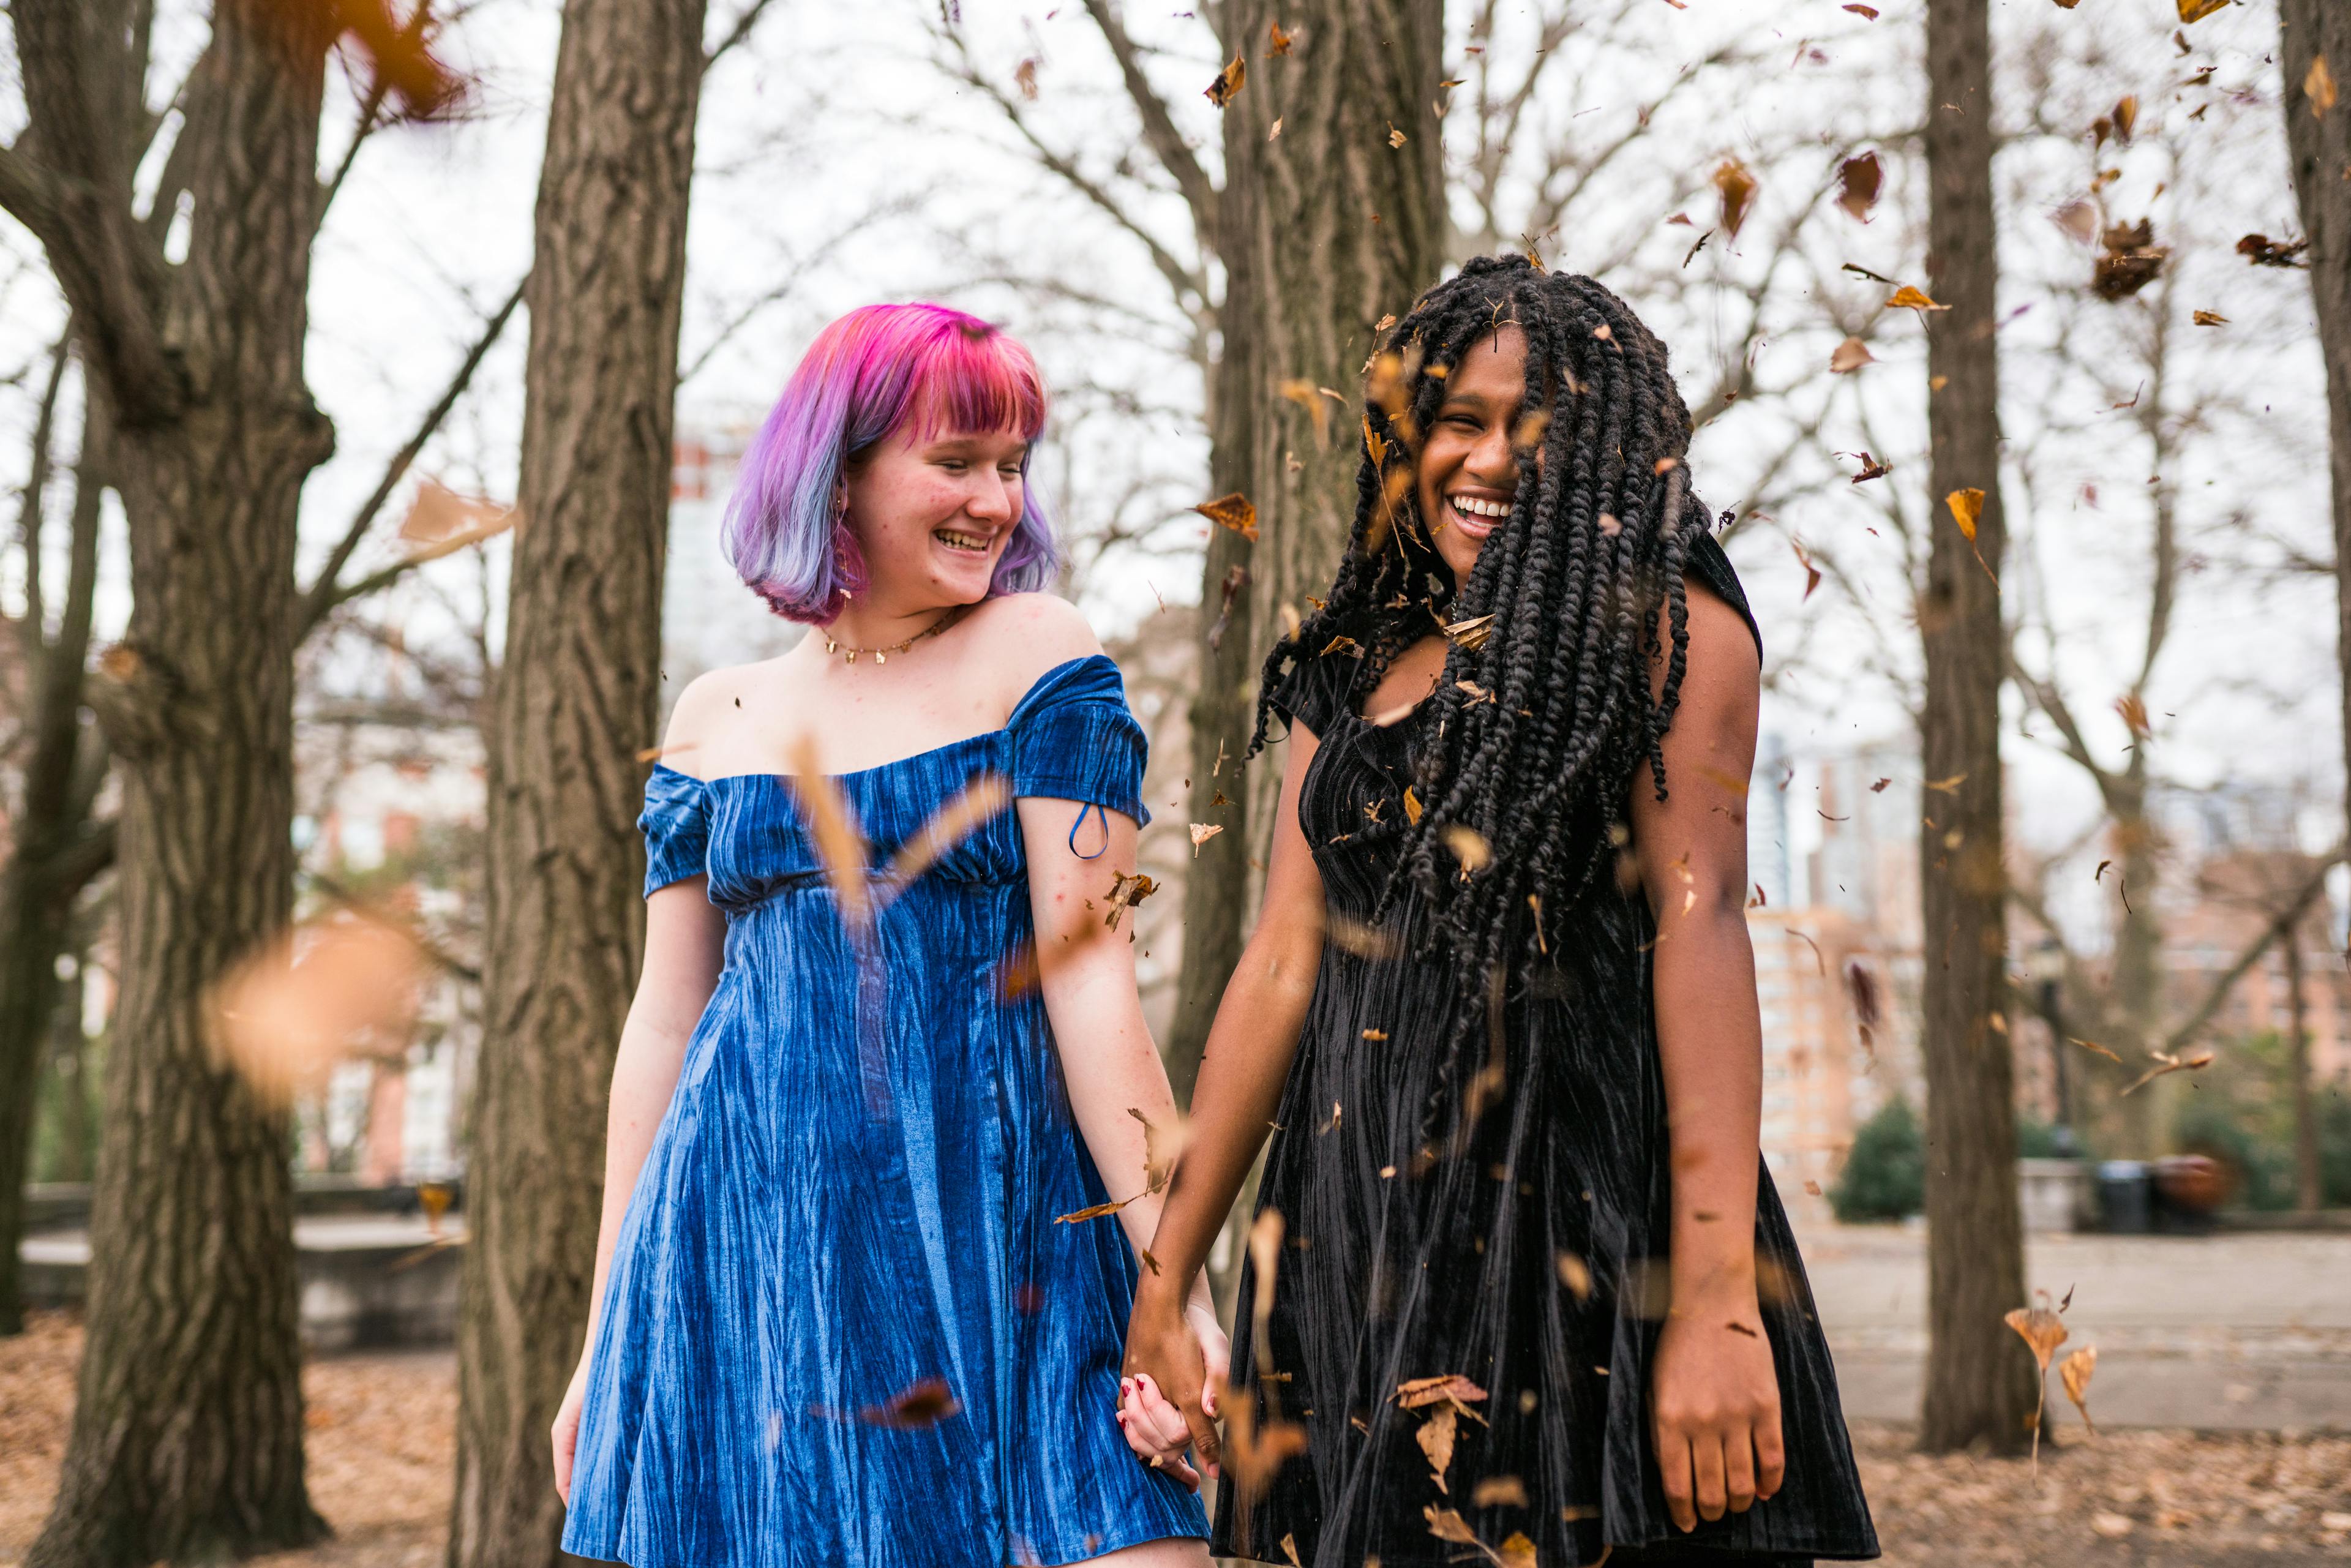 Two friends with colorful hair throwing leaves and laughing in an autumnal park setting